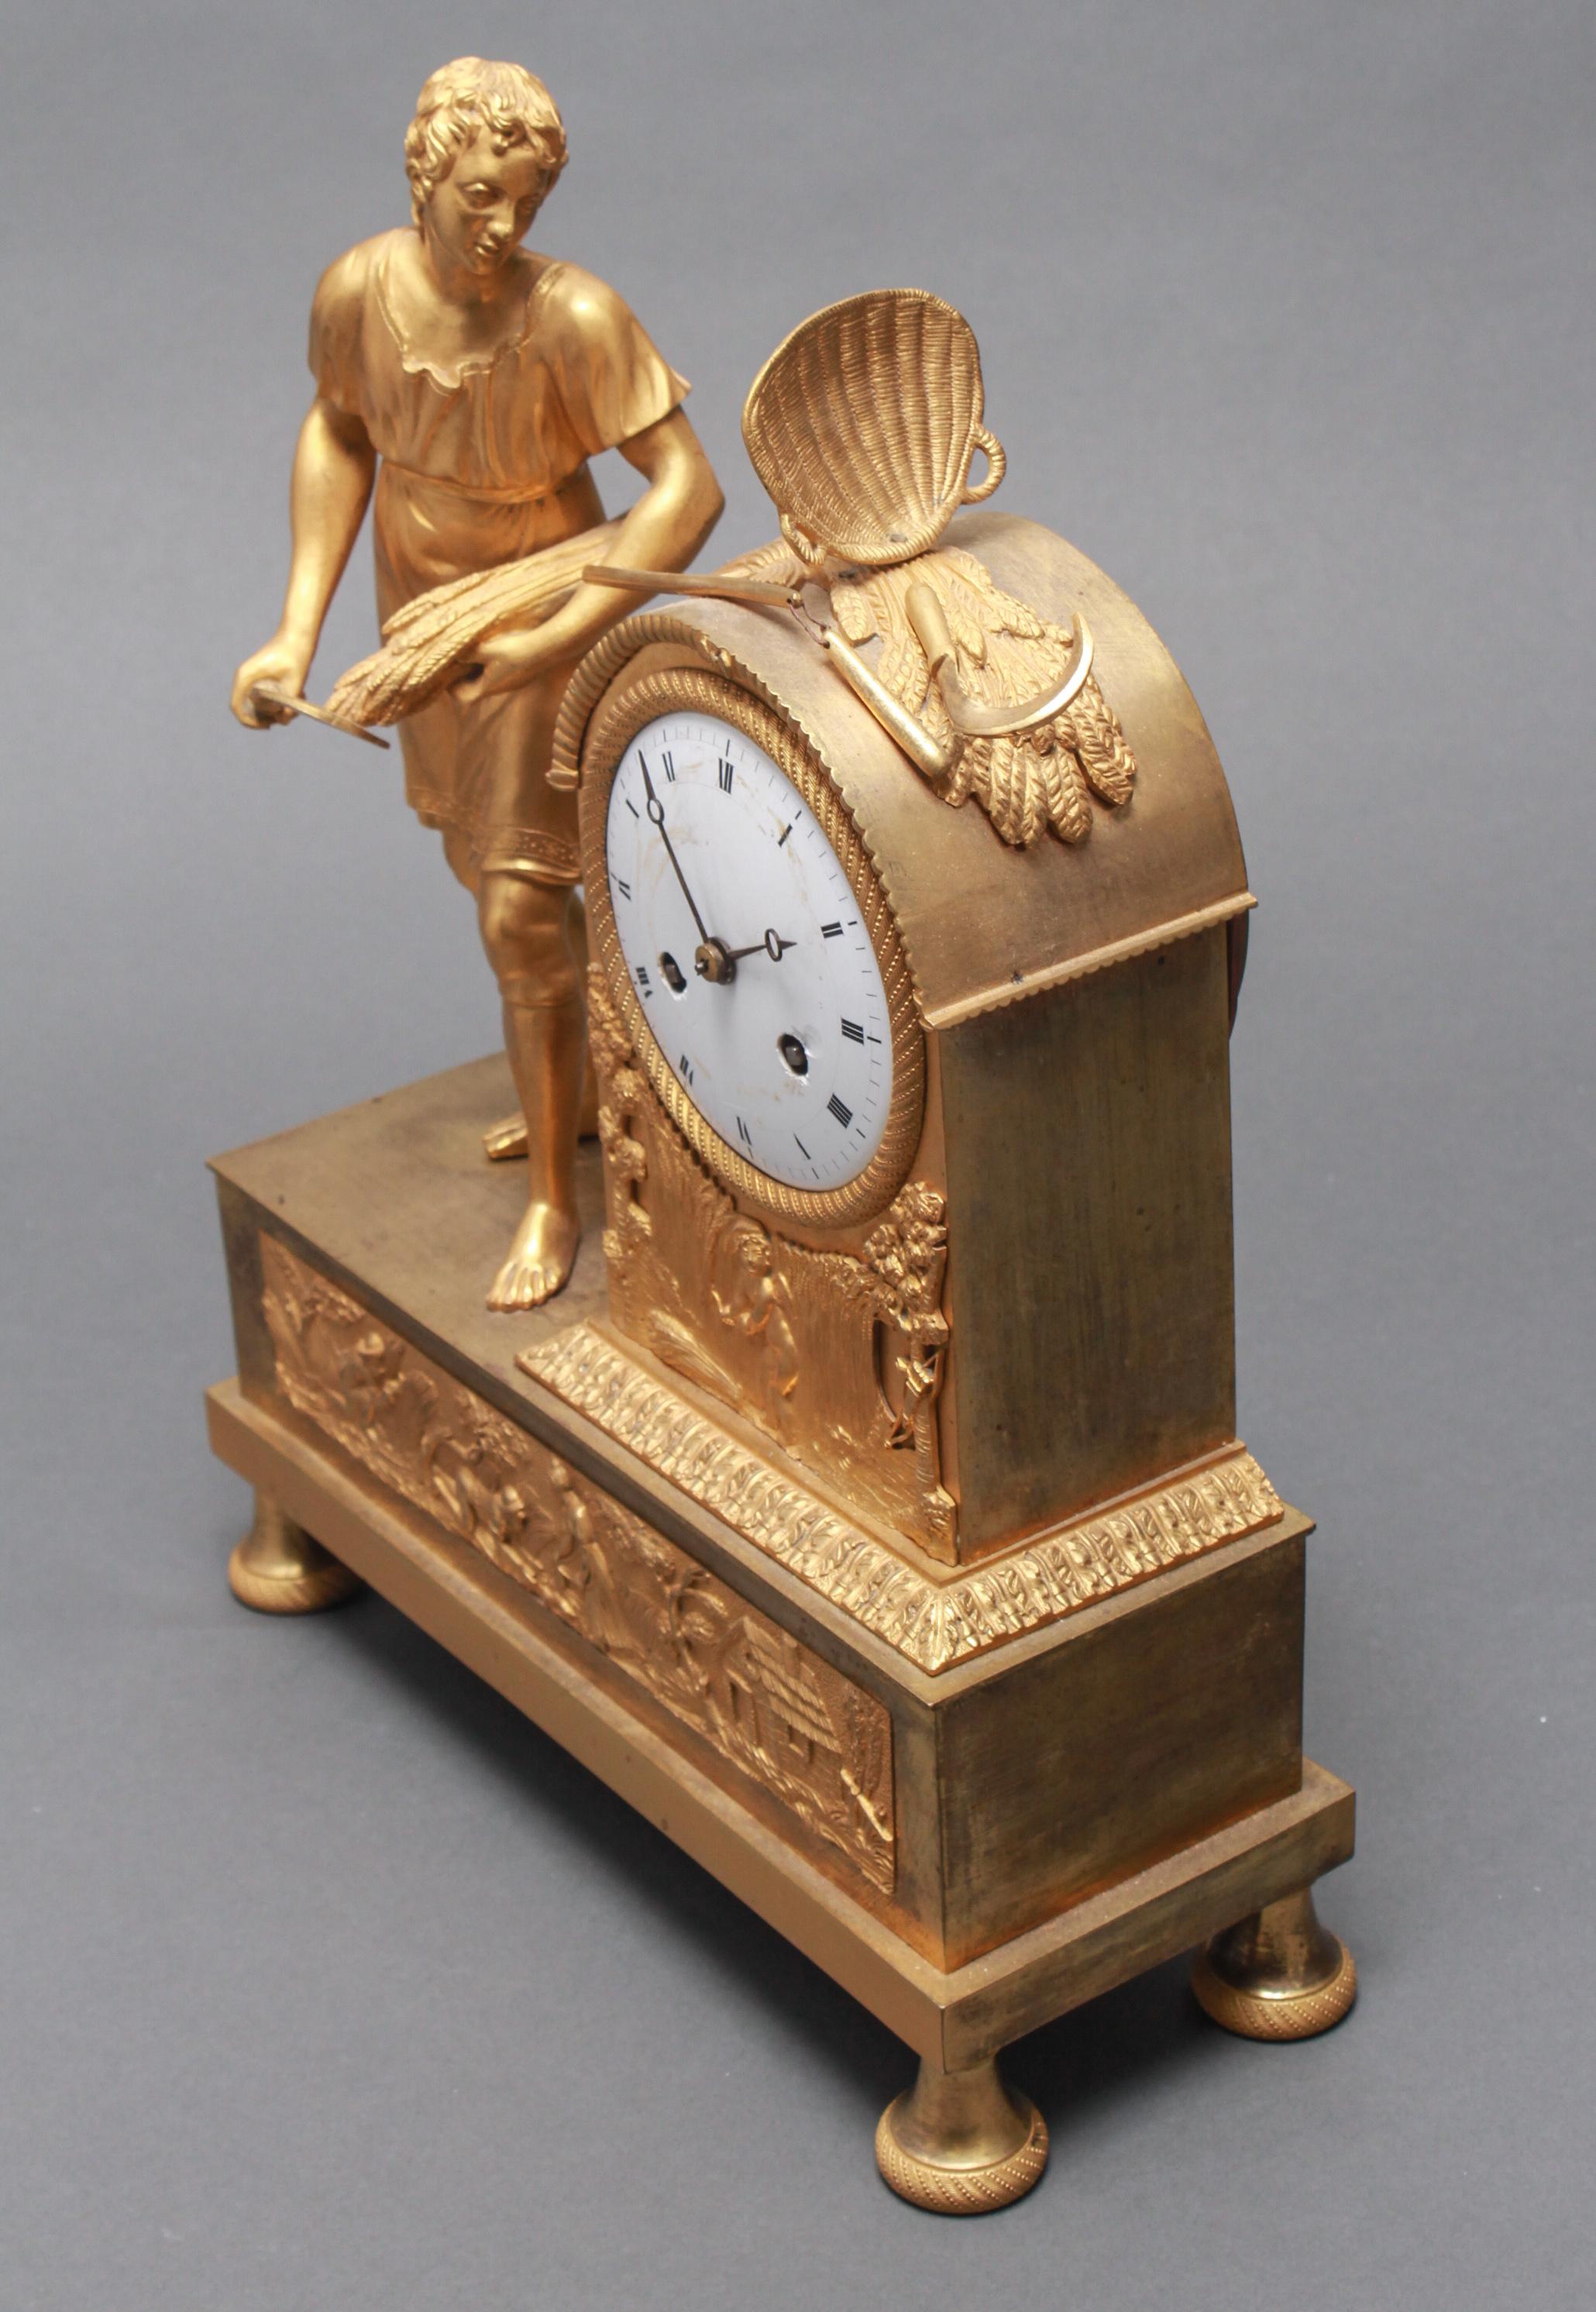 French gilt bronze ormolu figural chiming clock with a white porcelain dial bearing black Roman numerals. The piece features a reaper with a scythe and wheat in his left hand, on a neoclassical base with bun feet. Made during the 19th century. In